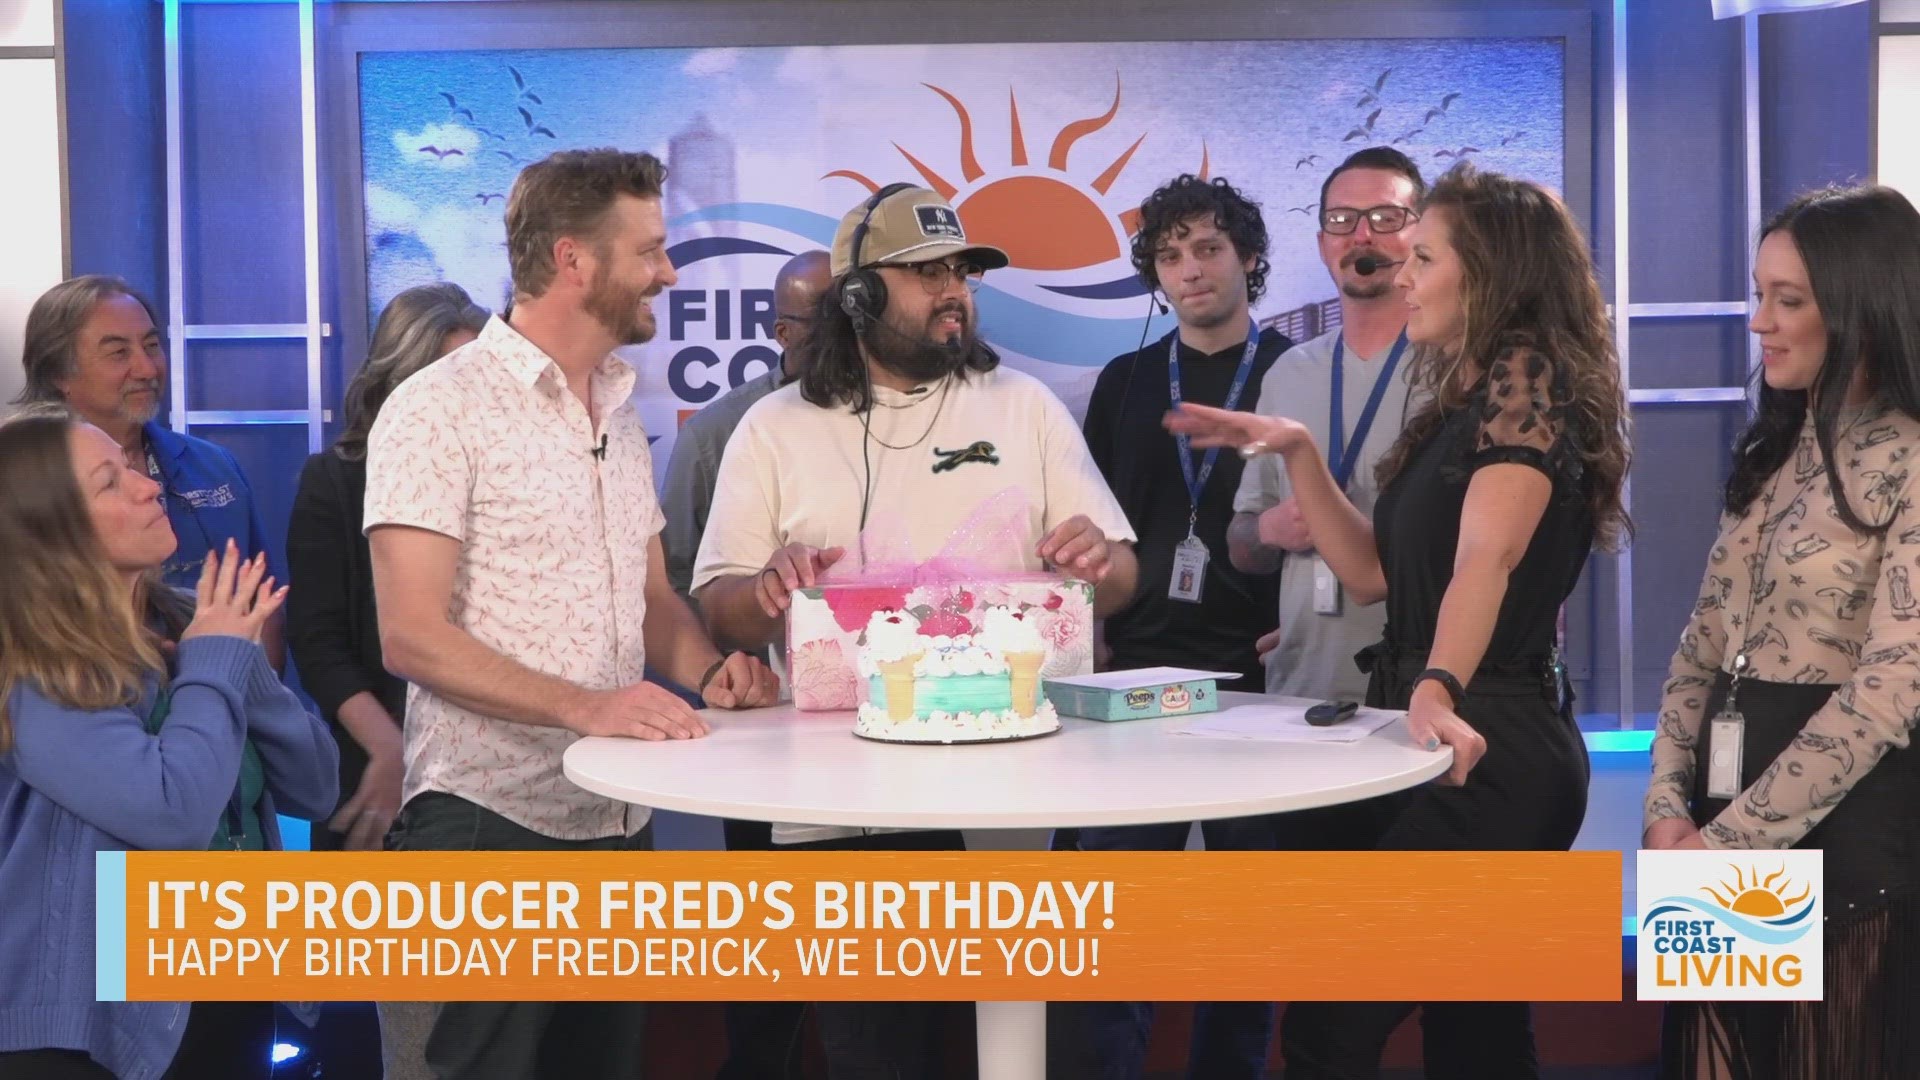 Happy birthday, Producer Fred! First Coast Living loves you!